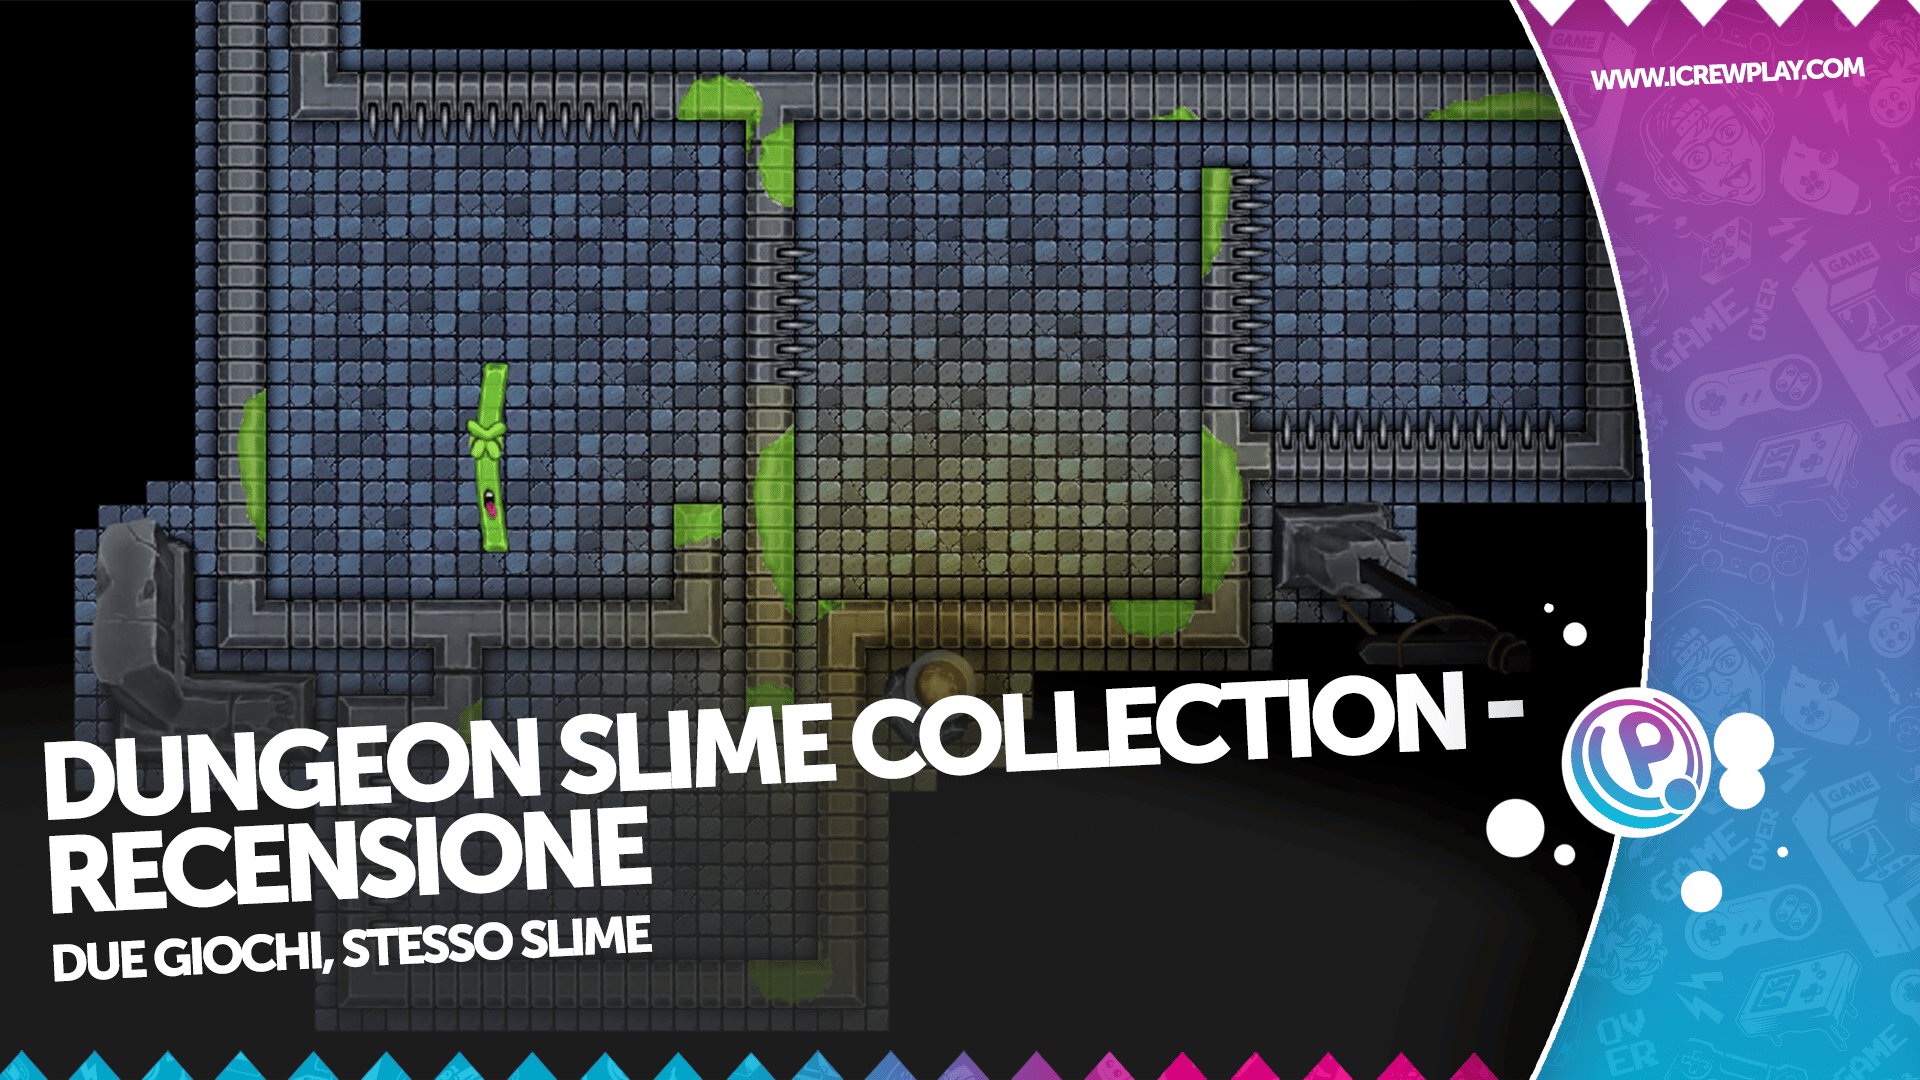 Dungeon Slime Collection - Recensione per Nintendo Switch 8